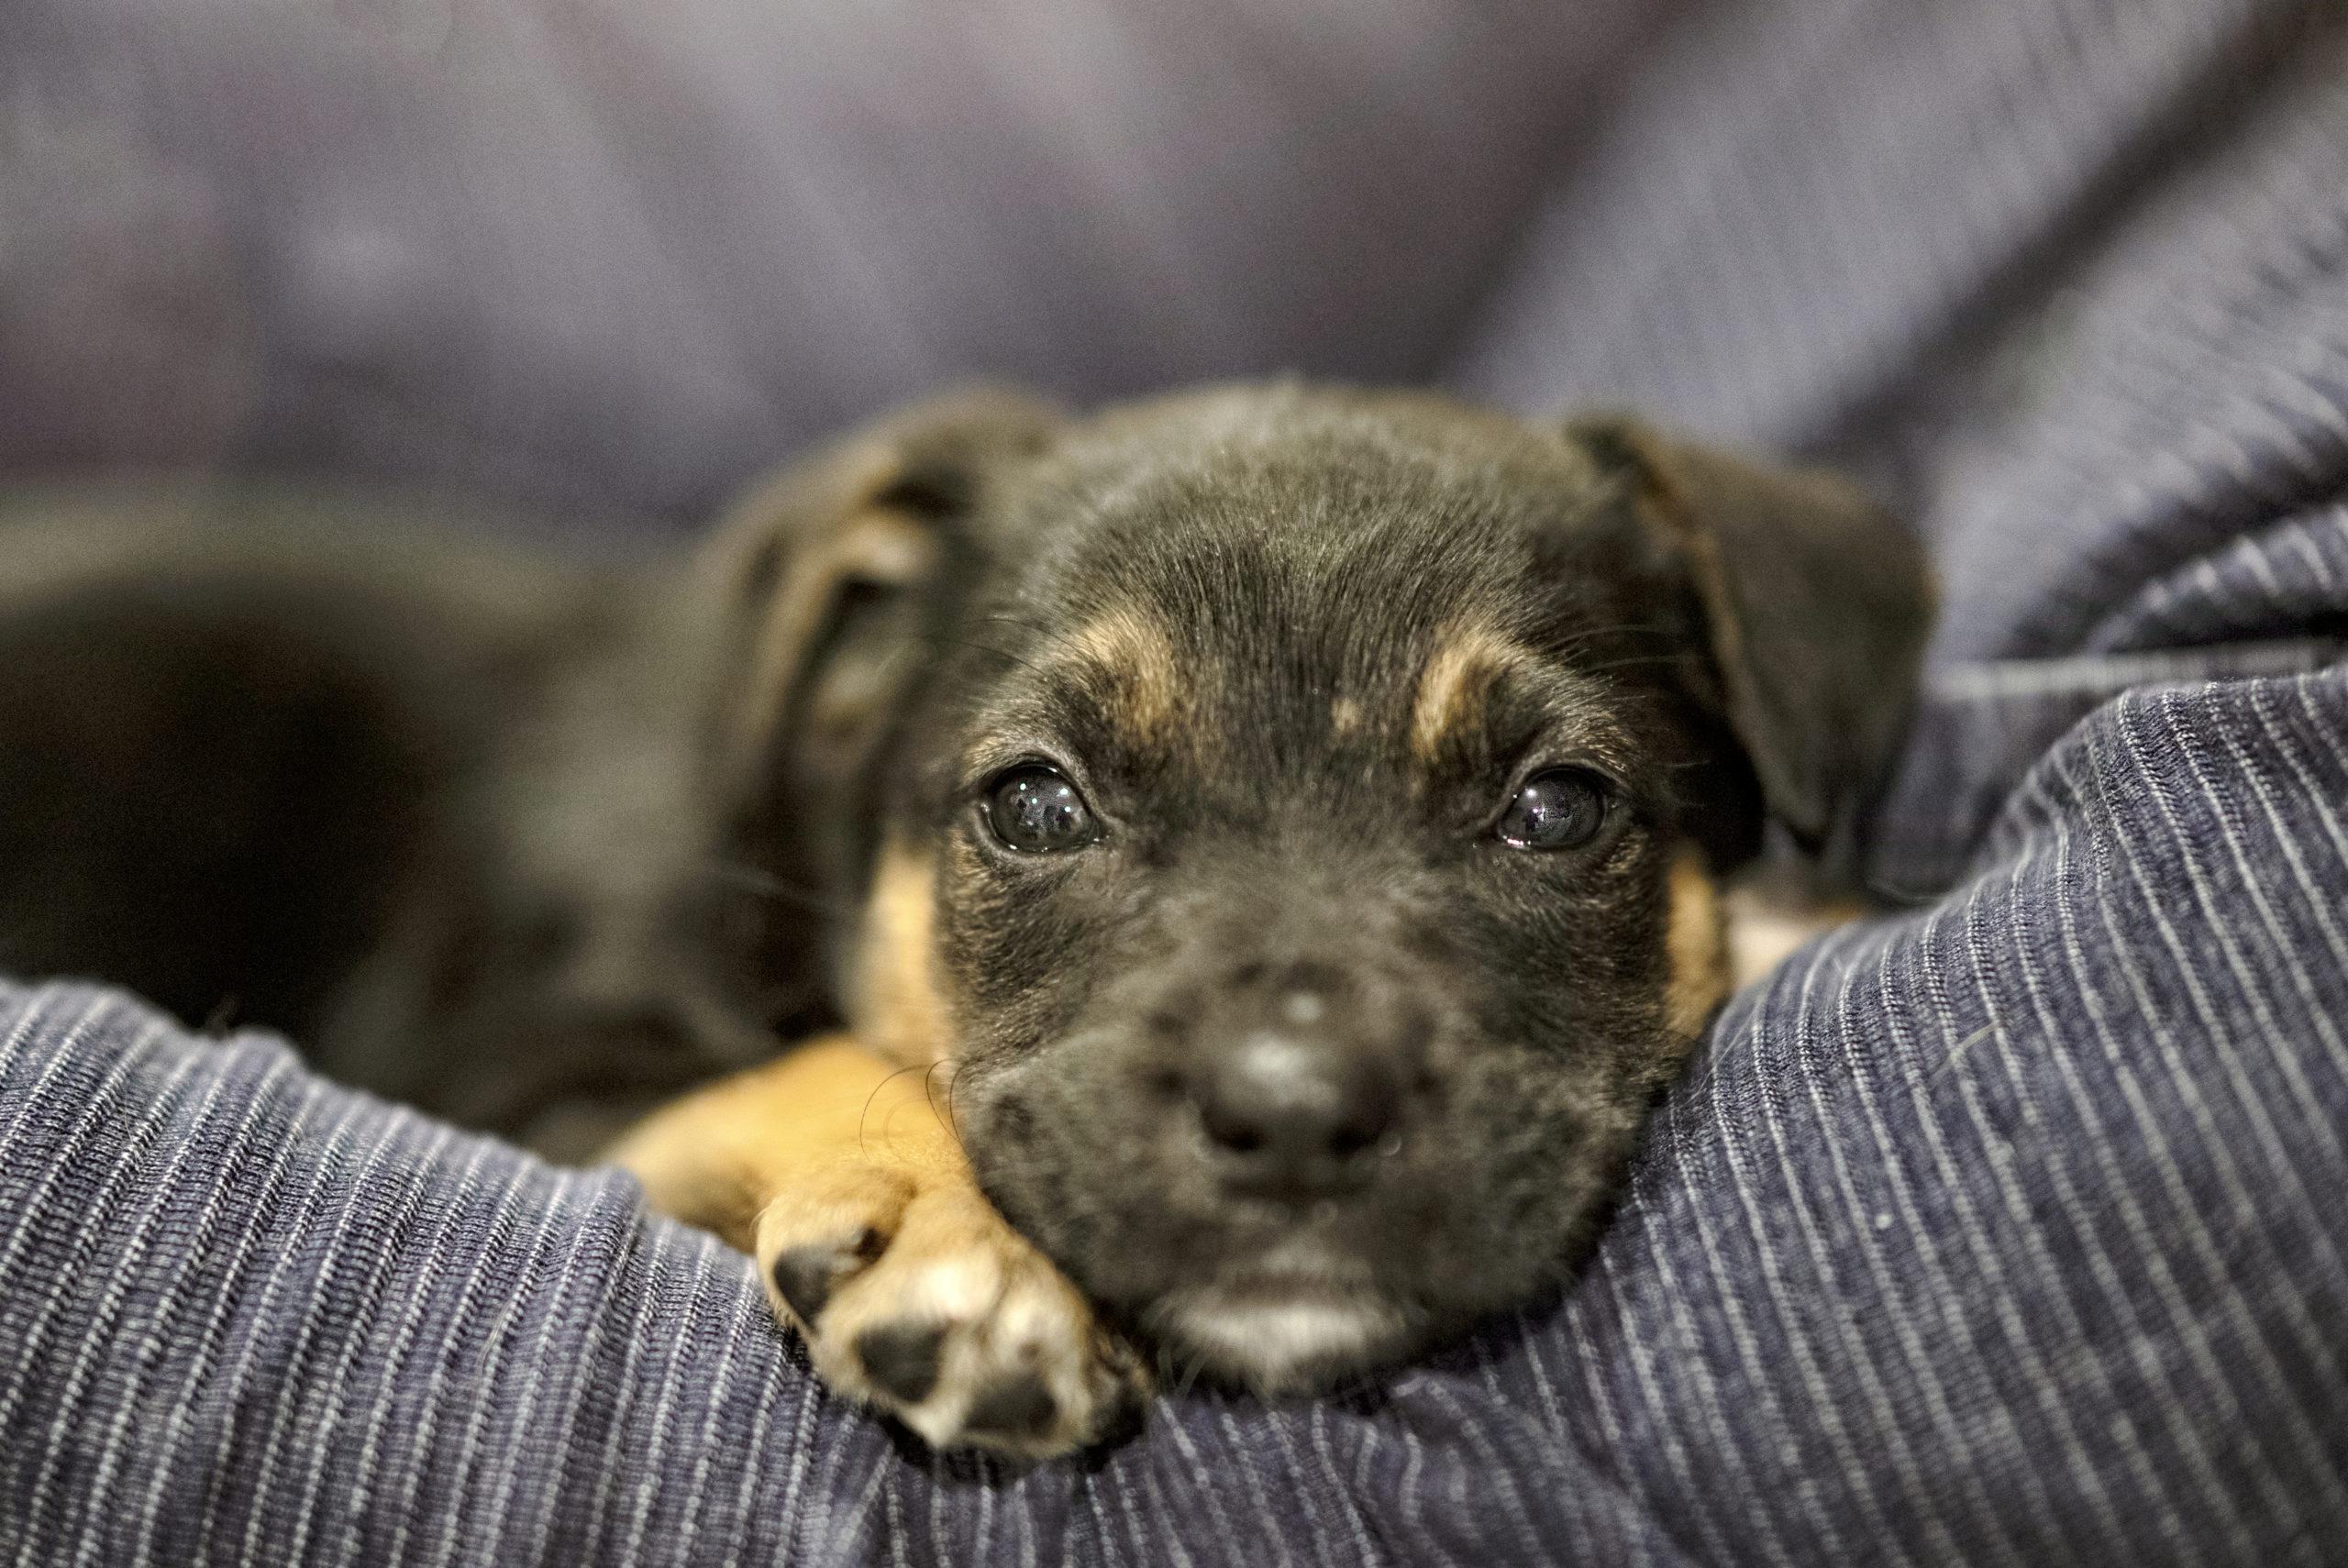 Volunteering: You can foster, adopt, or work with our puppies & dogs